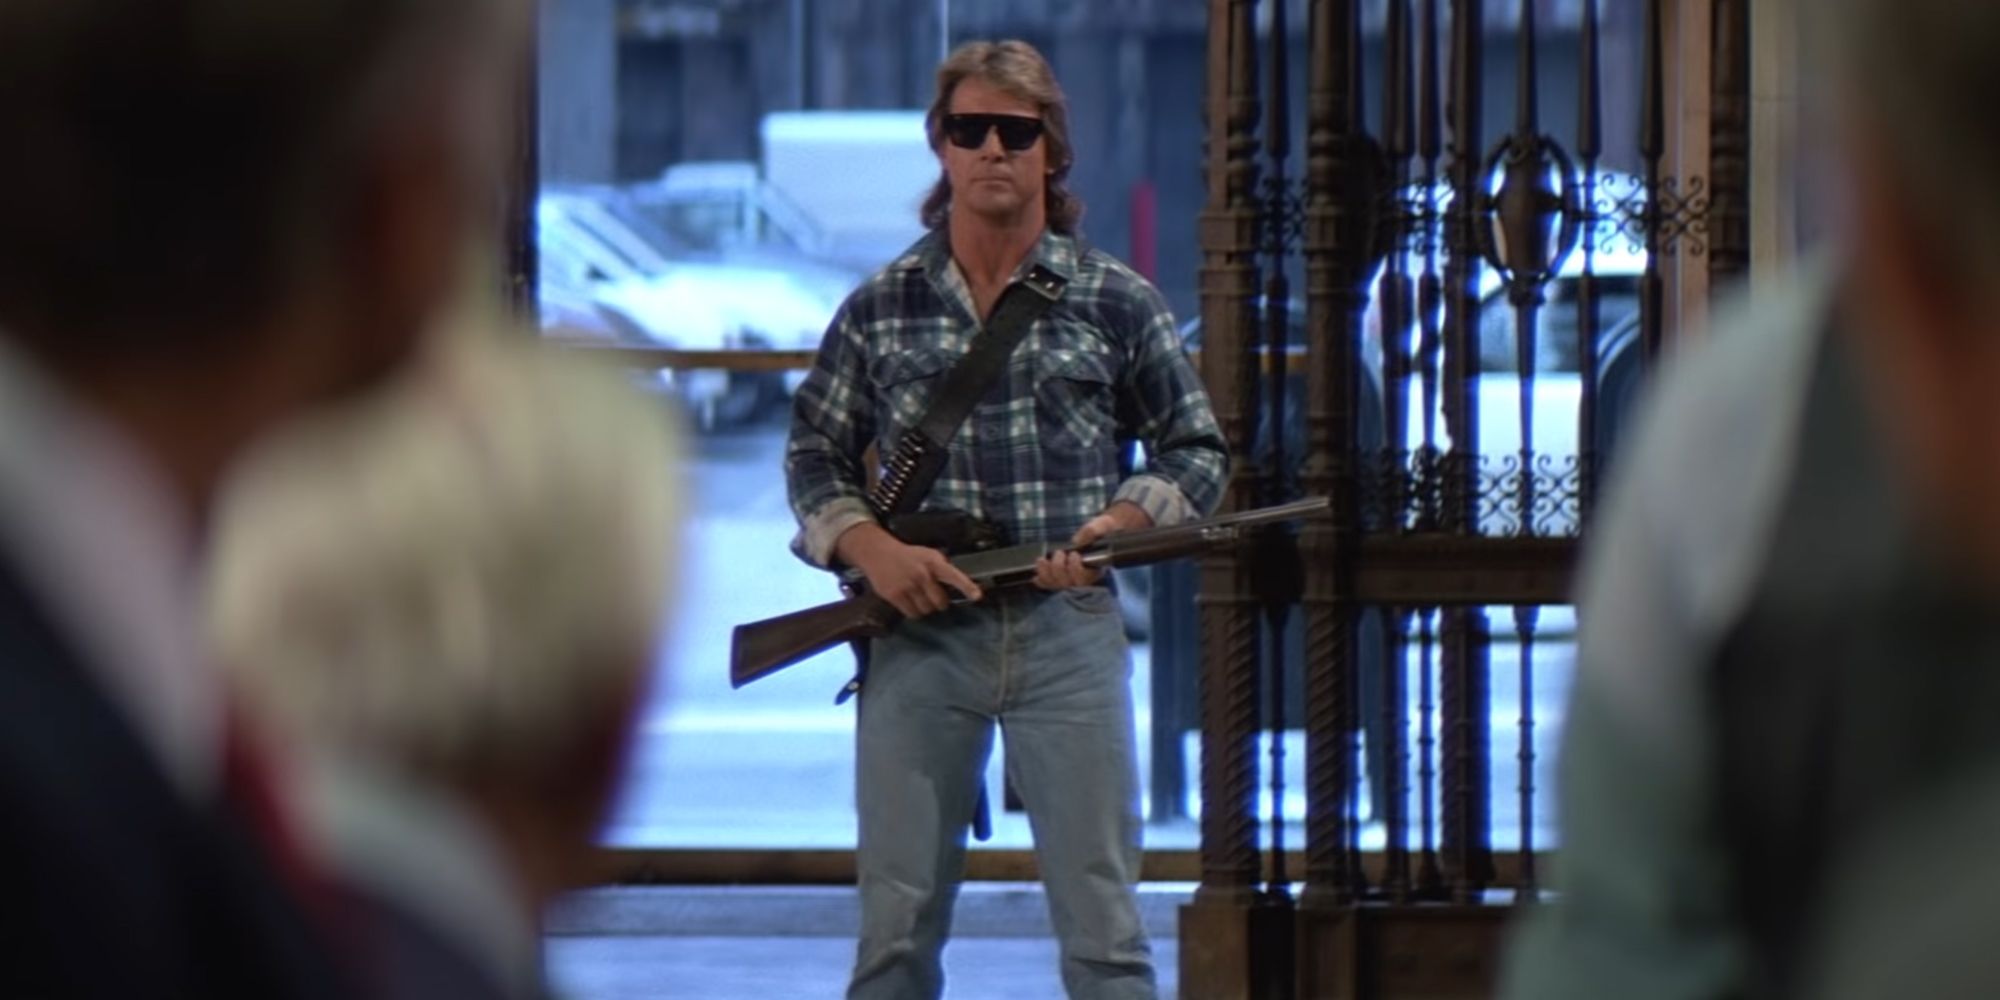 "I have Come Here To Chew Bubblegum And Kick Ass… And I’m All Out Of Bubblegum." - John Nada, They Live (1988)